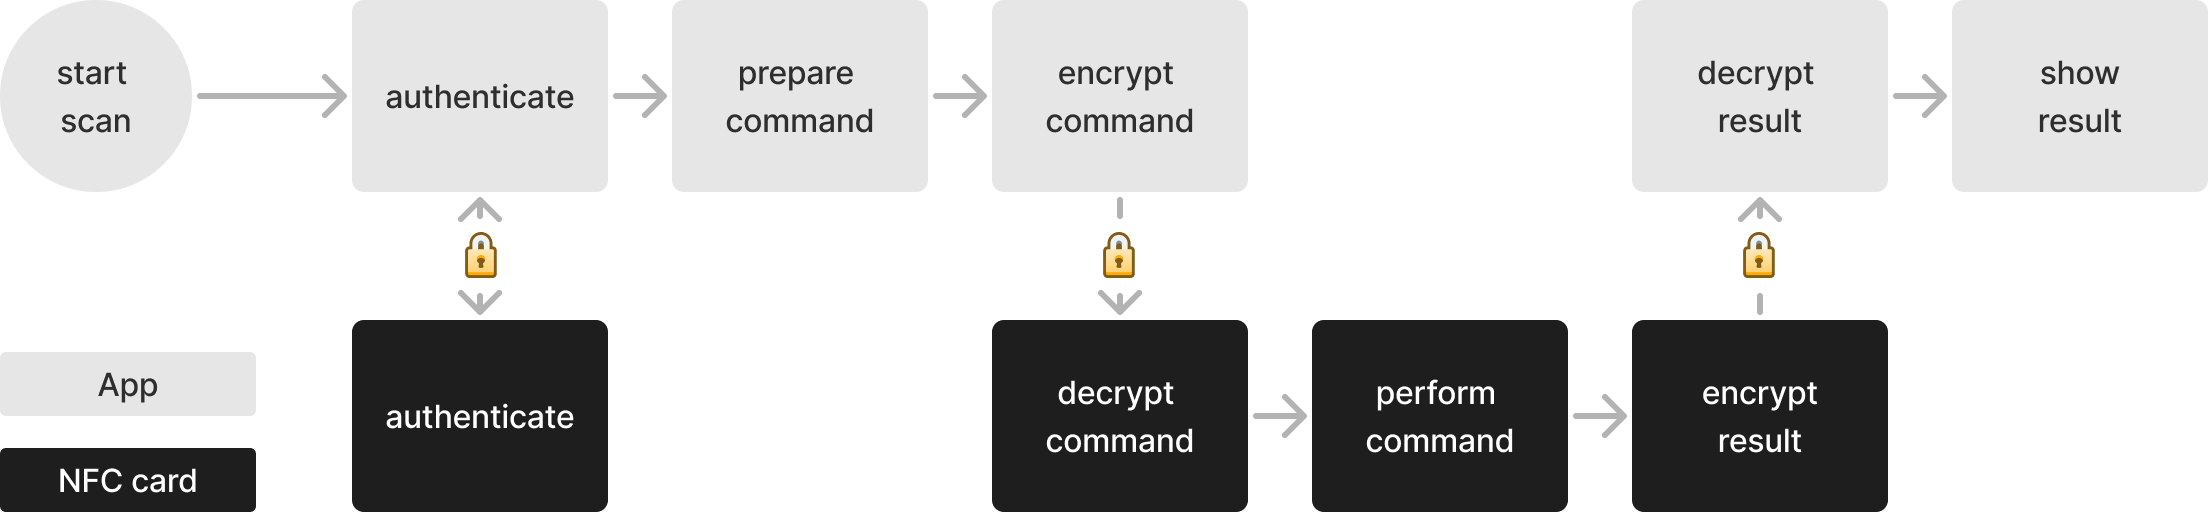 example workflow of encrypted communication